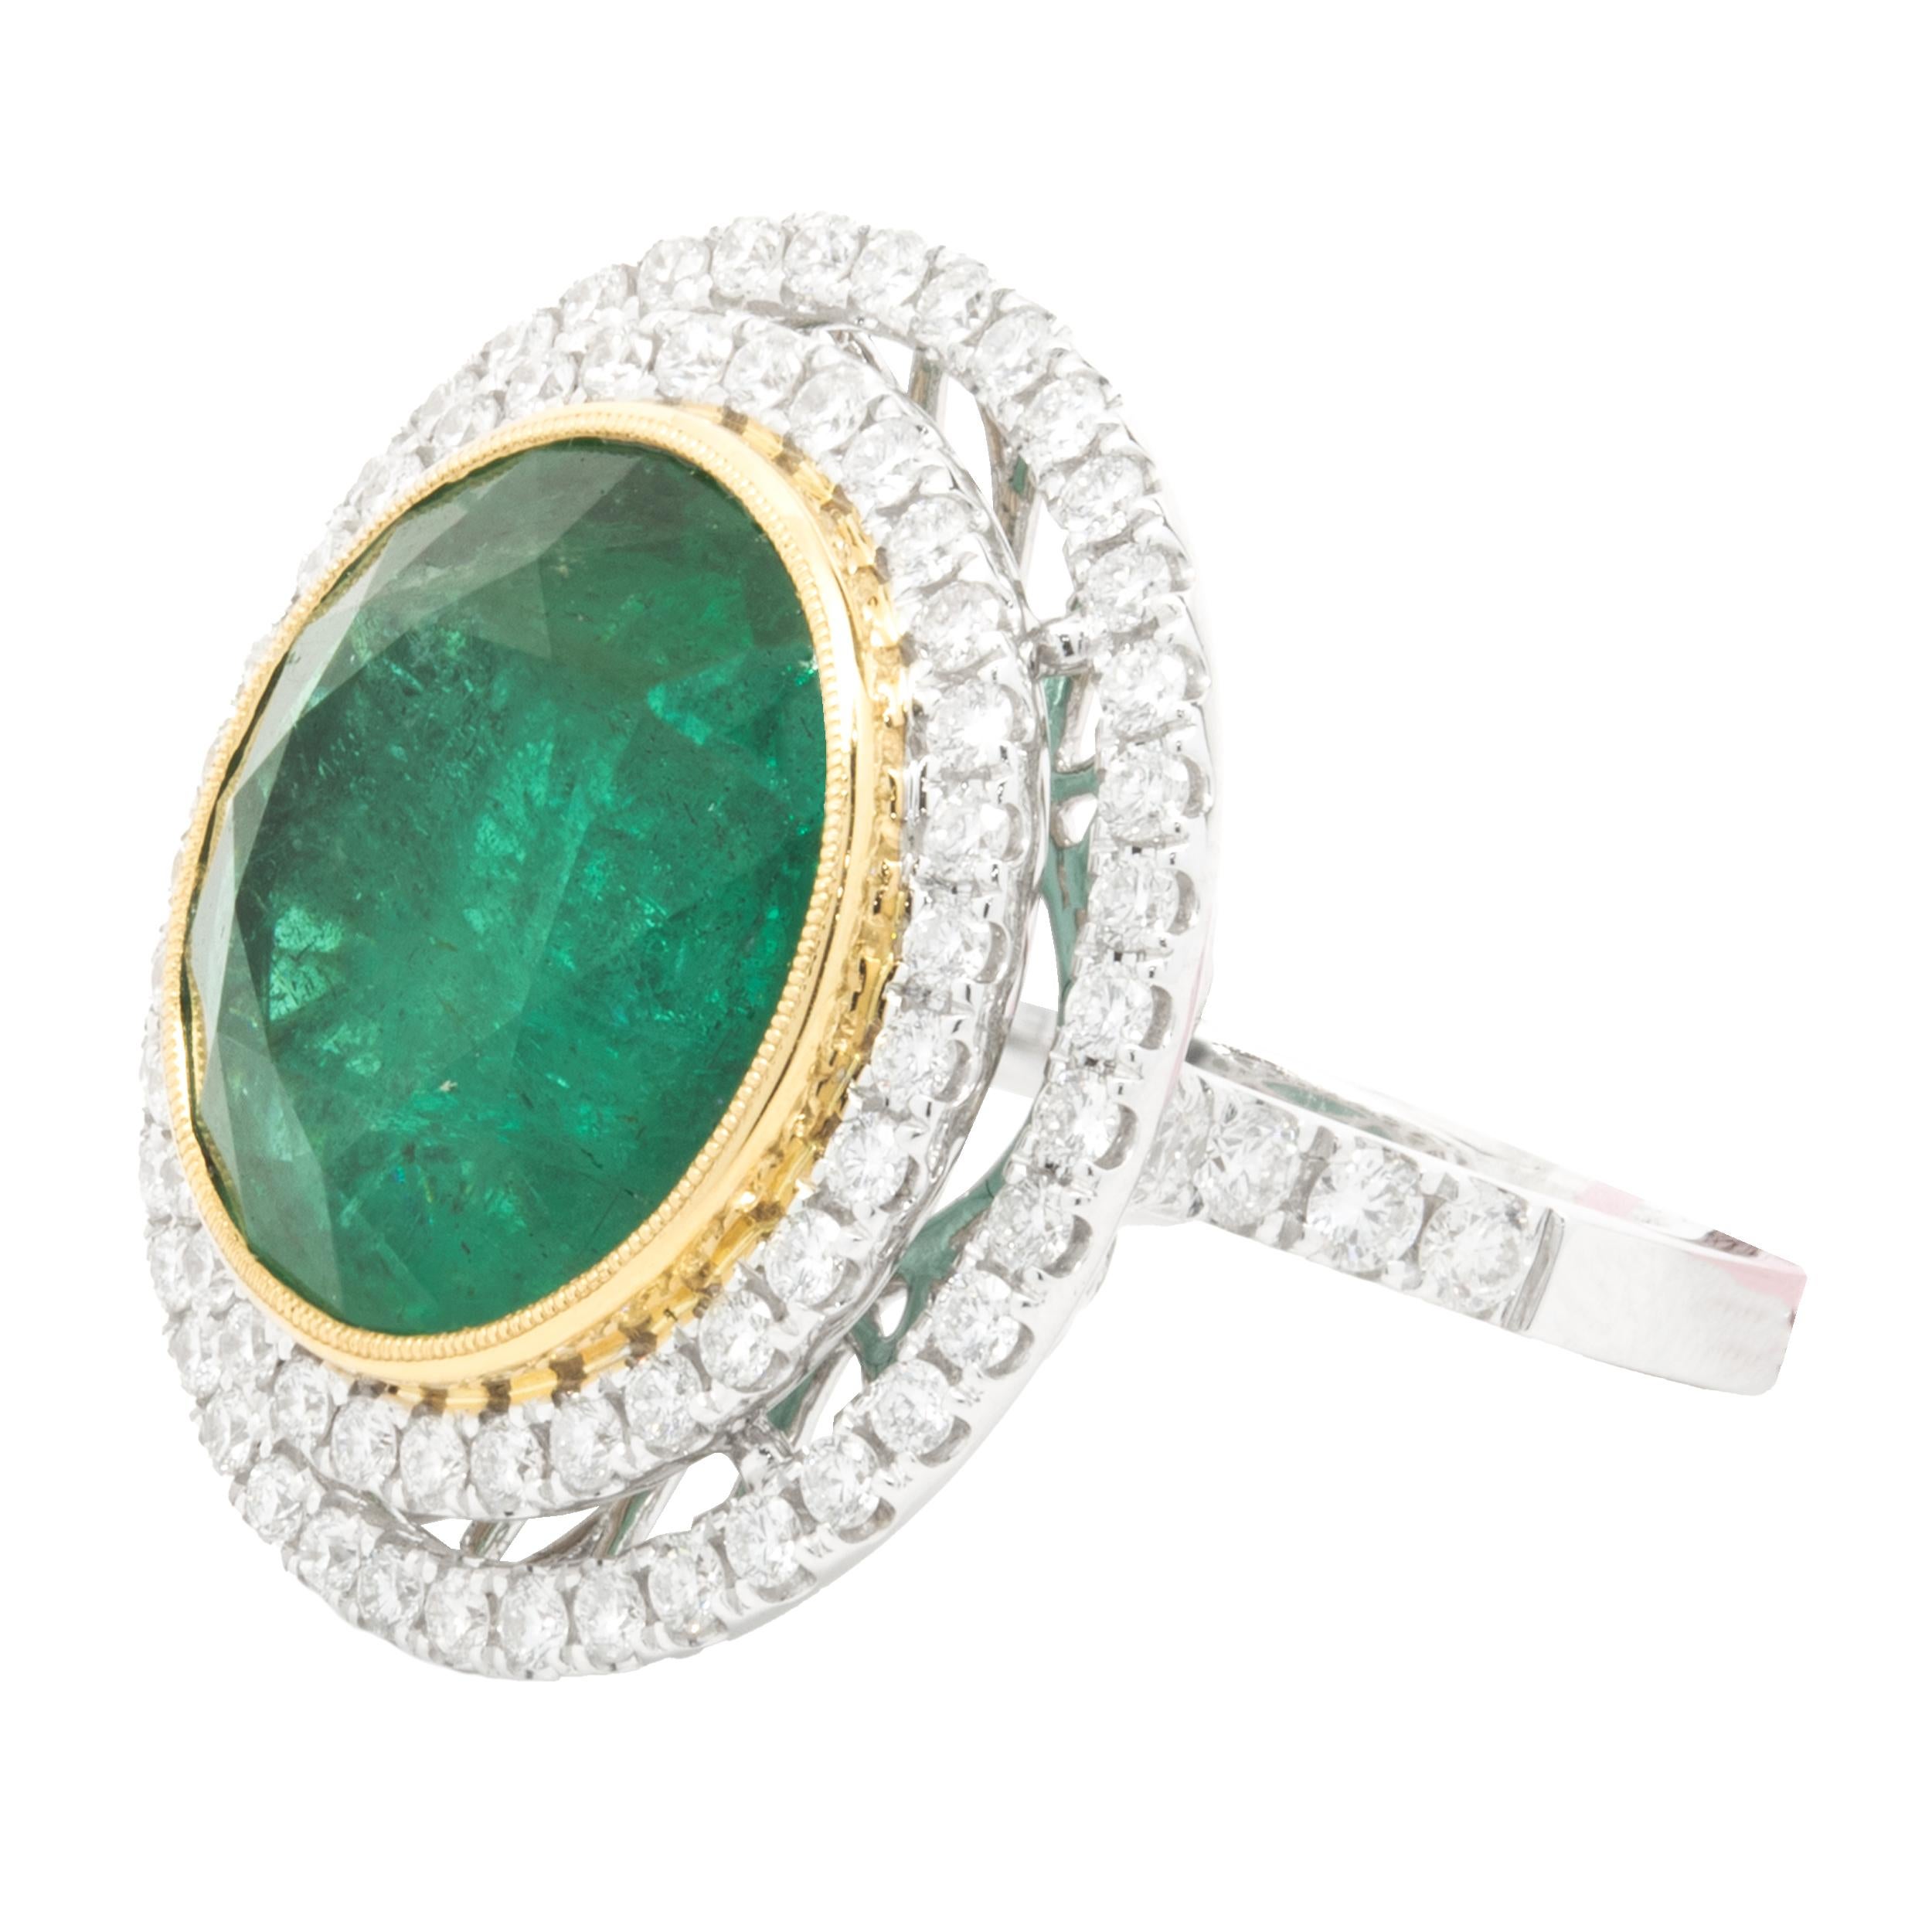 Designer: custom
Material: 18K white & yellow gold
Diamond: 82 round brilliant cut = 1.53cttw
Color: G
Clarity: VS1-2
Emerald: 1 round cut = 14.36ct
Ring Size: 6 (complimentary sizing available)
Weight: 15.99 grams